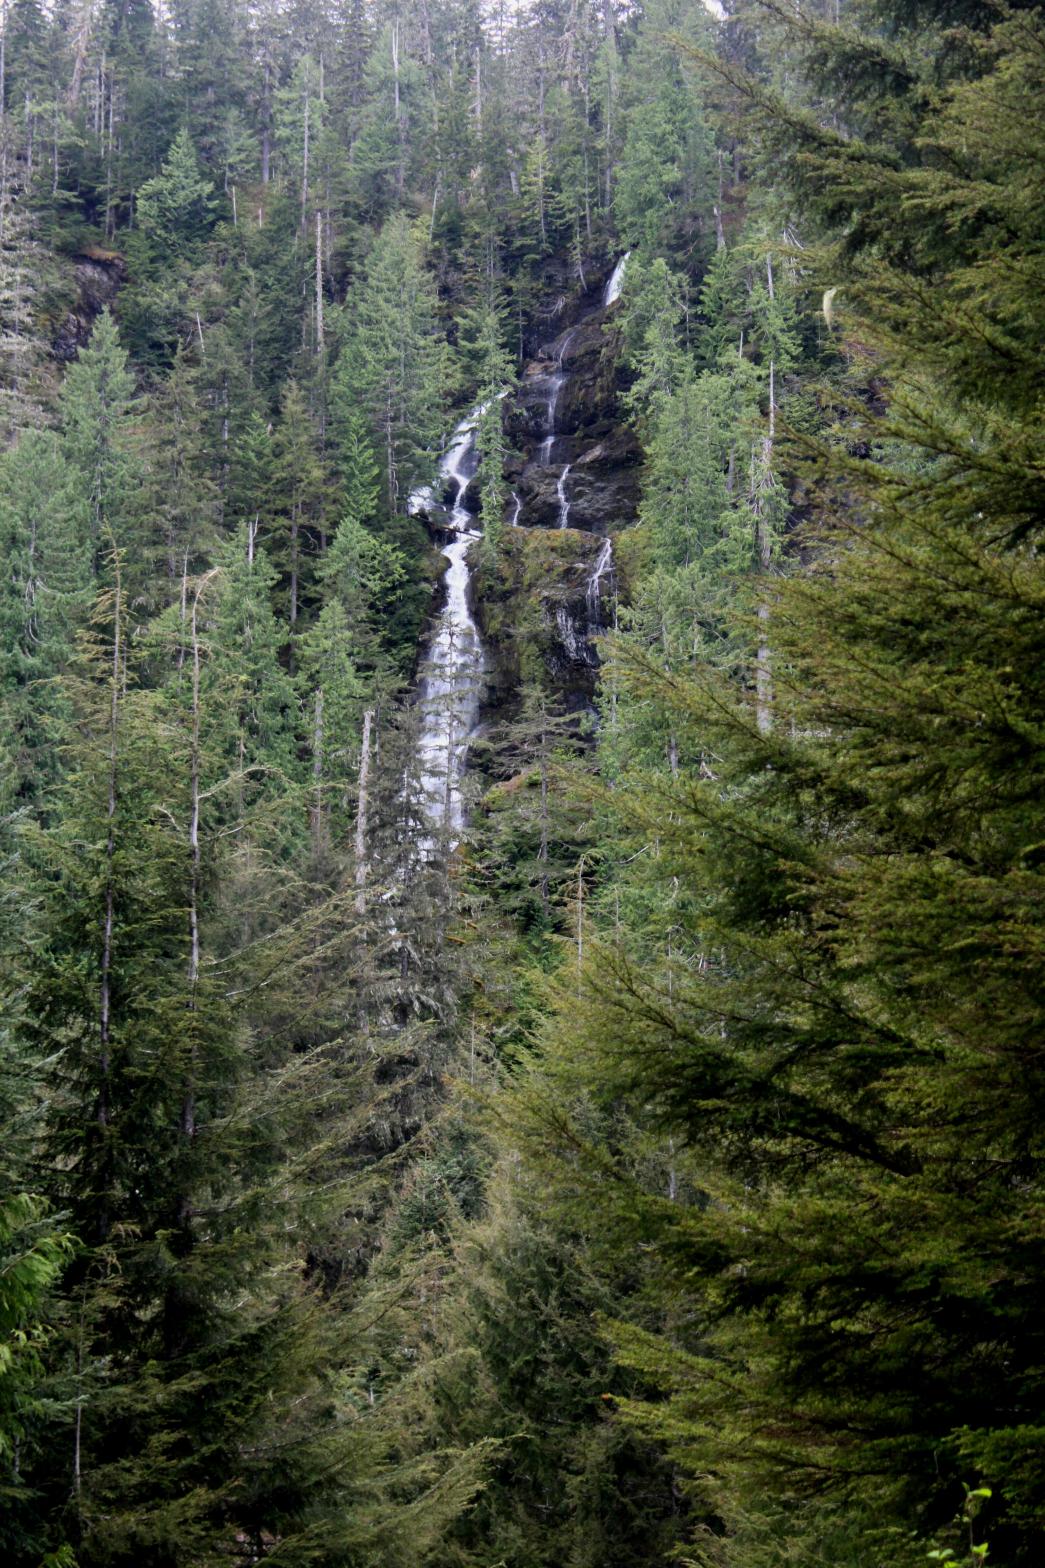 Upper Washington Falls from the road